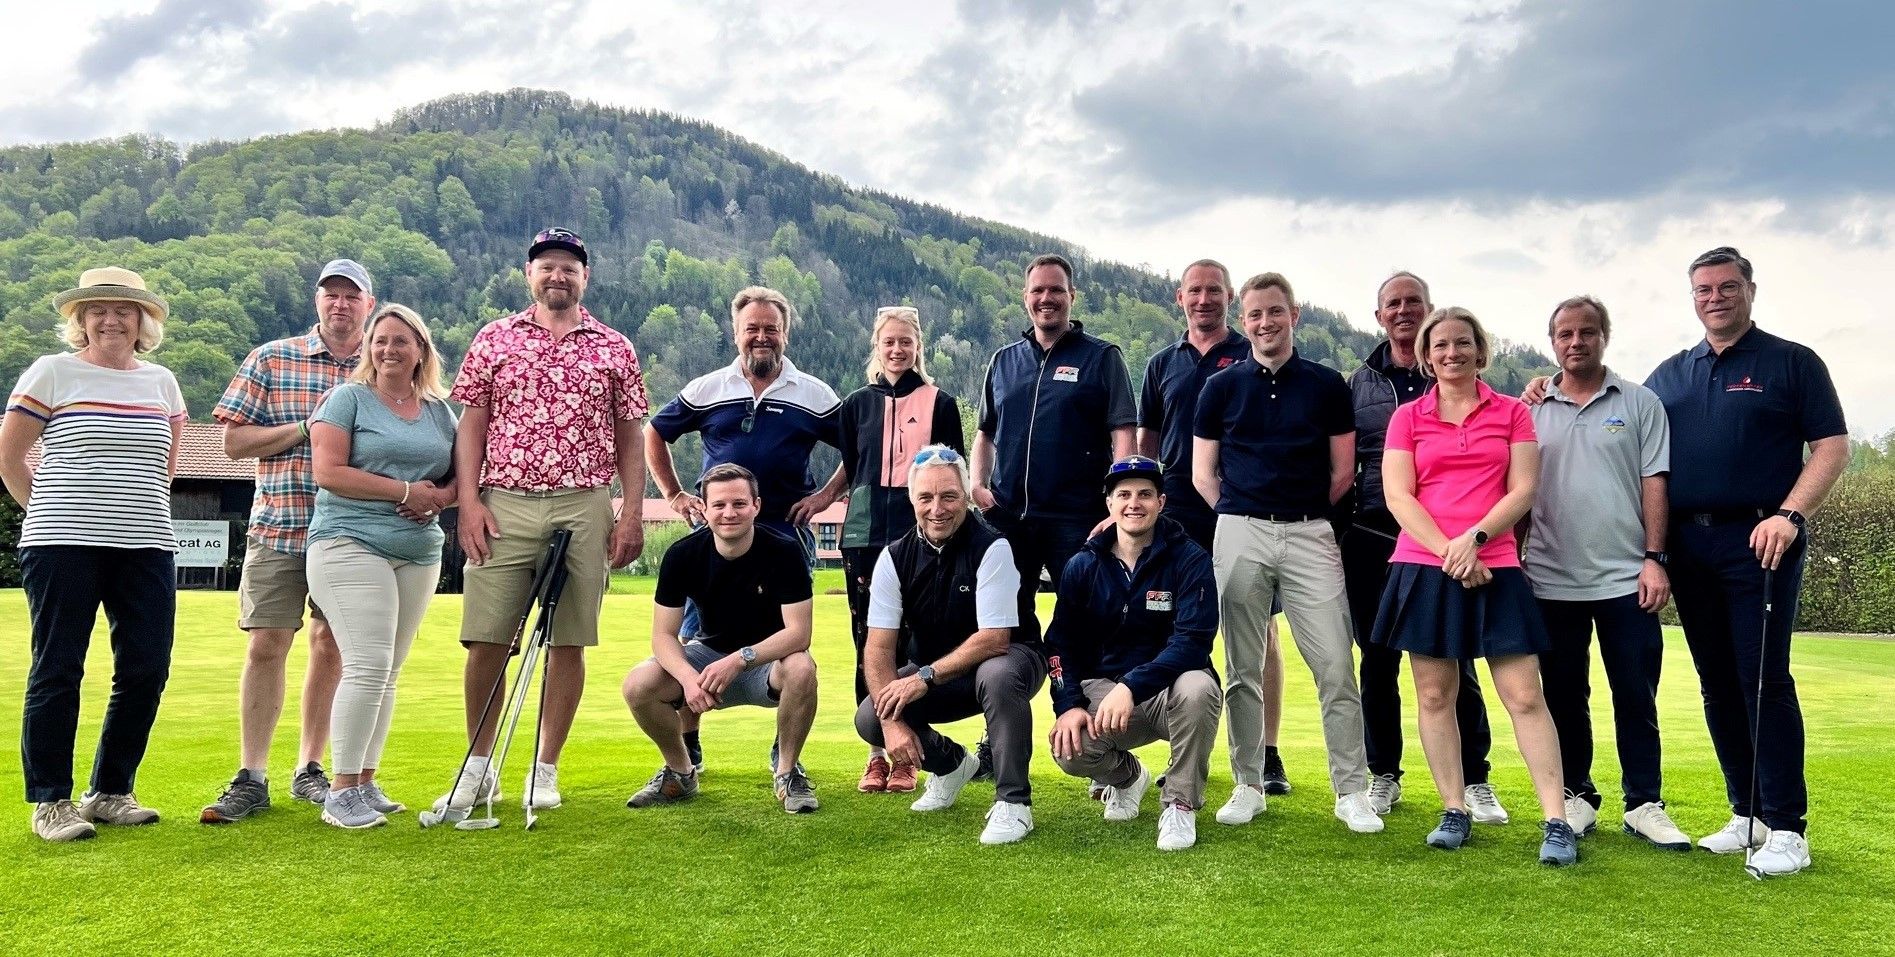 Erster Blaulicht-Golf-Tag in Ruhpolding. Foto: GC-Rupolding